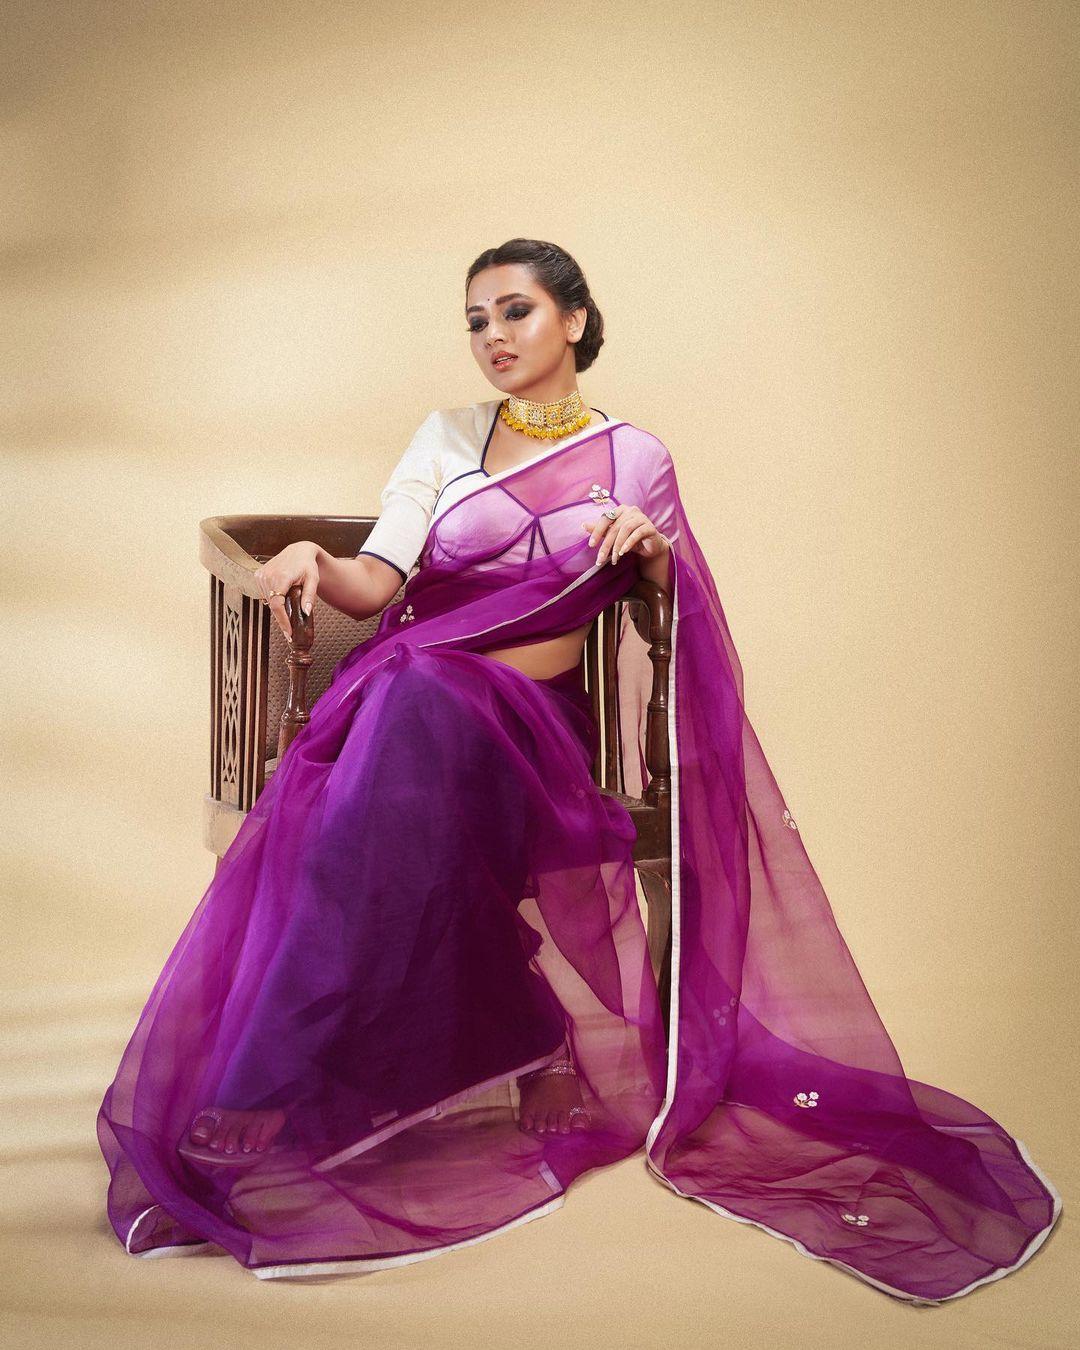 Feeling like acing the look with minimum effort? Then grab a sheer purple-coloured saree like Tejasswi Prakash and pair it with a stylish white blouse, and trust us, you will get a lot of praise during this Pooja